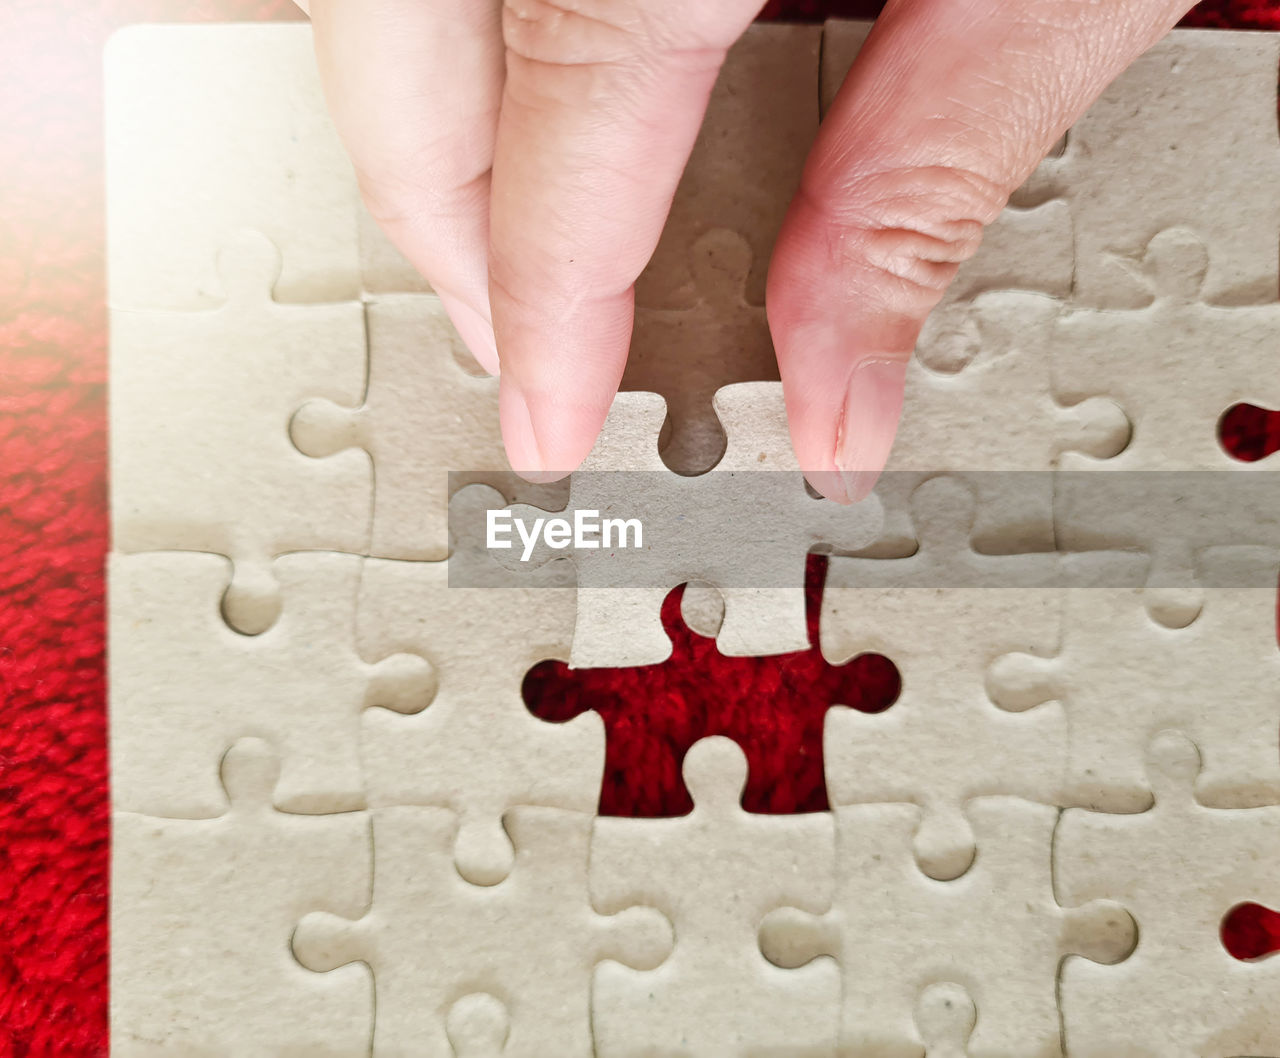 puzzle, jigsaw piece, jigsaw puzzle, solution, strategy, hand, toy, cooperation, leisure activity, teamwork, leisure games, shape, indoors, incomplete, togetherness, adult, unity, close-up, relaxation, red, high angle view, planning, pattern, holding, large group of objects, interlocked, organization